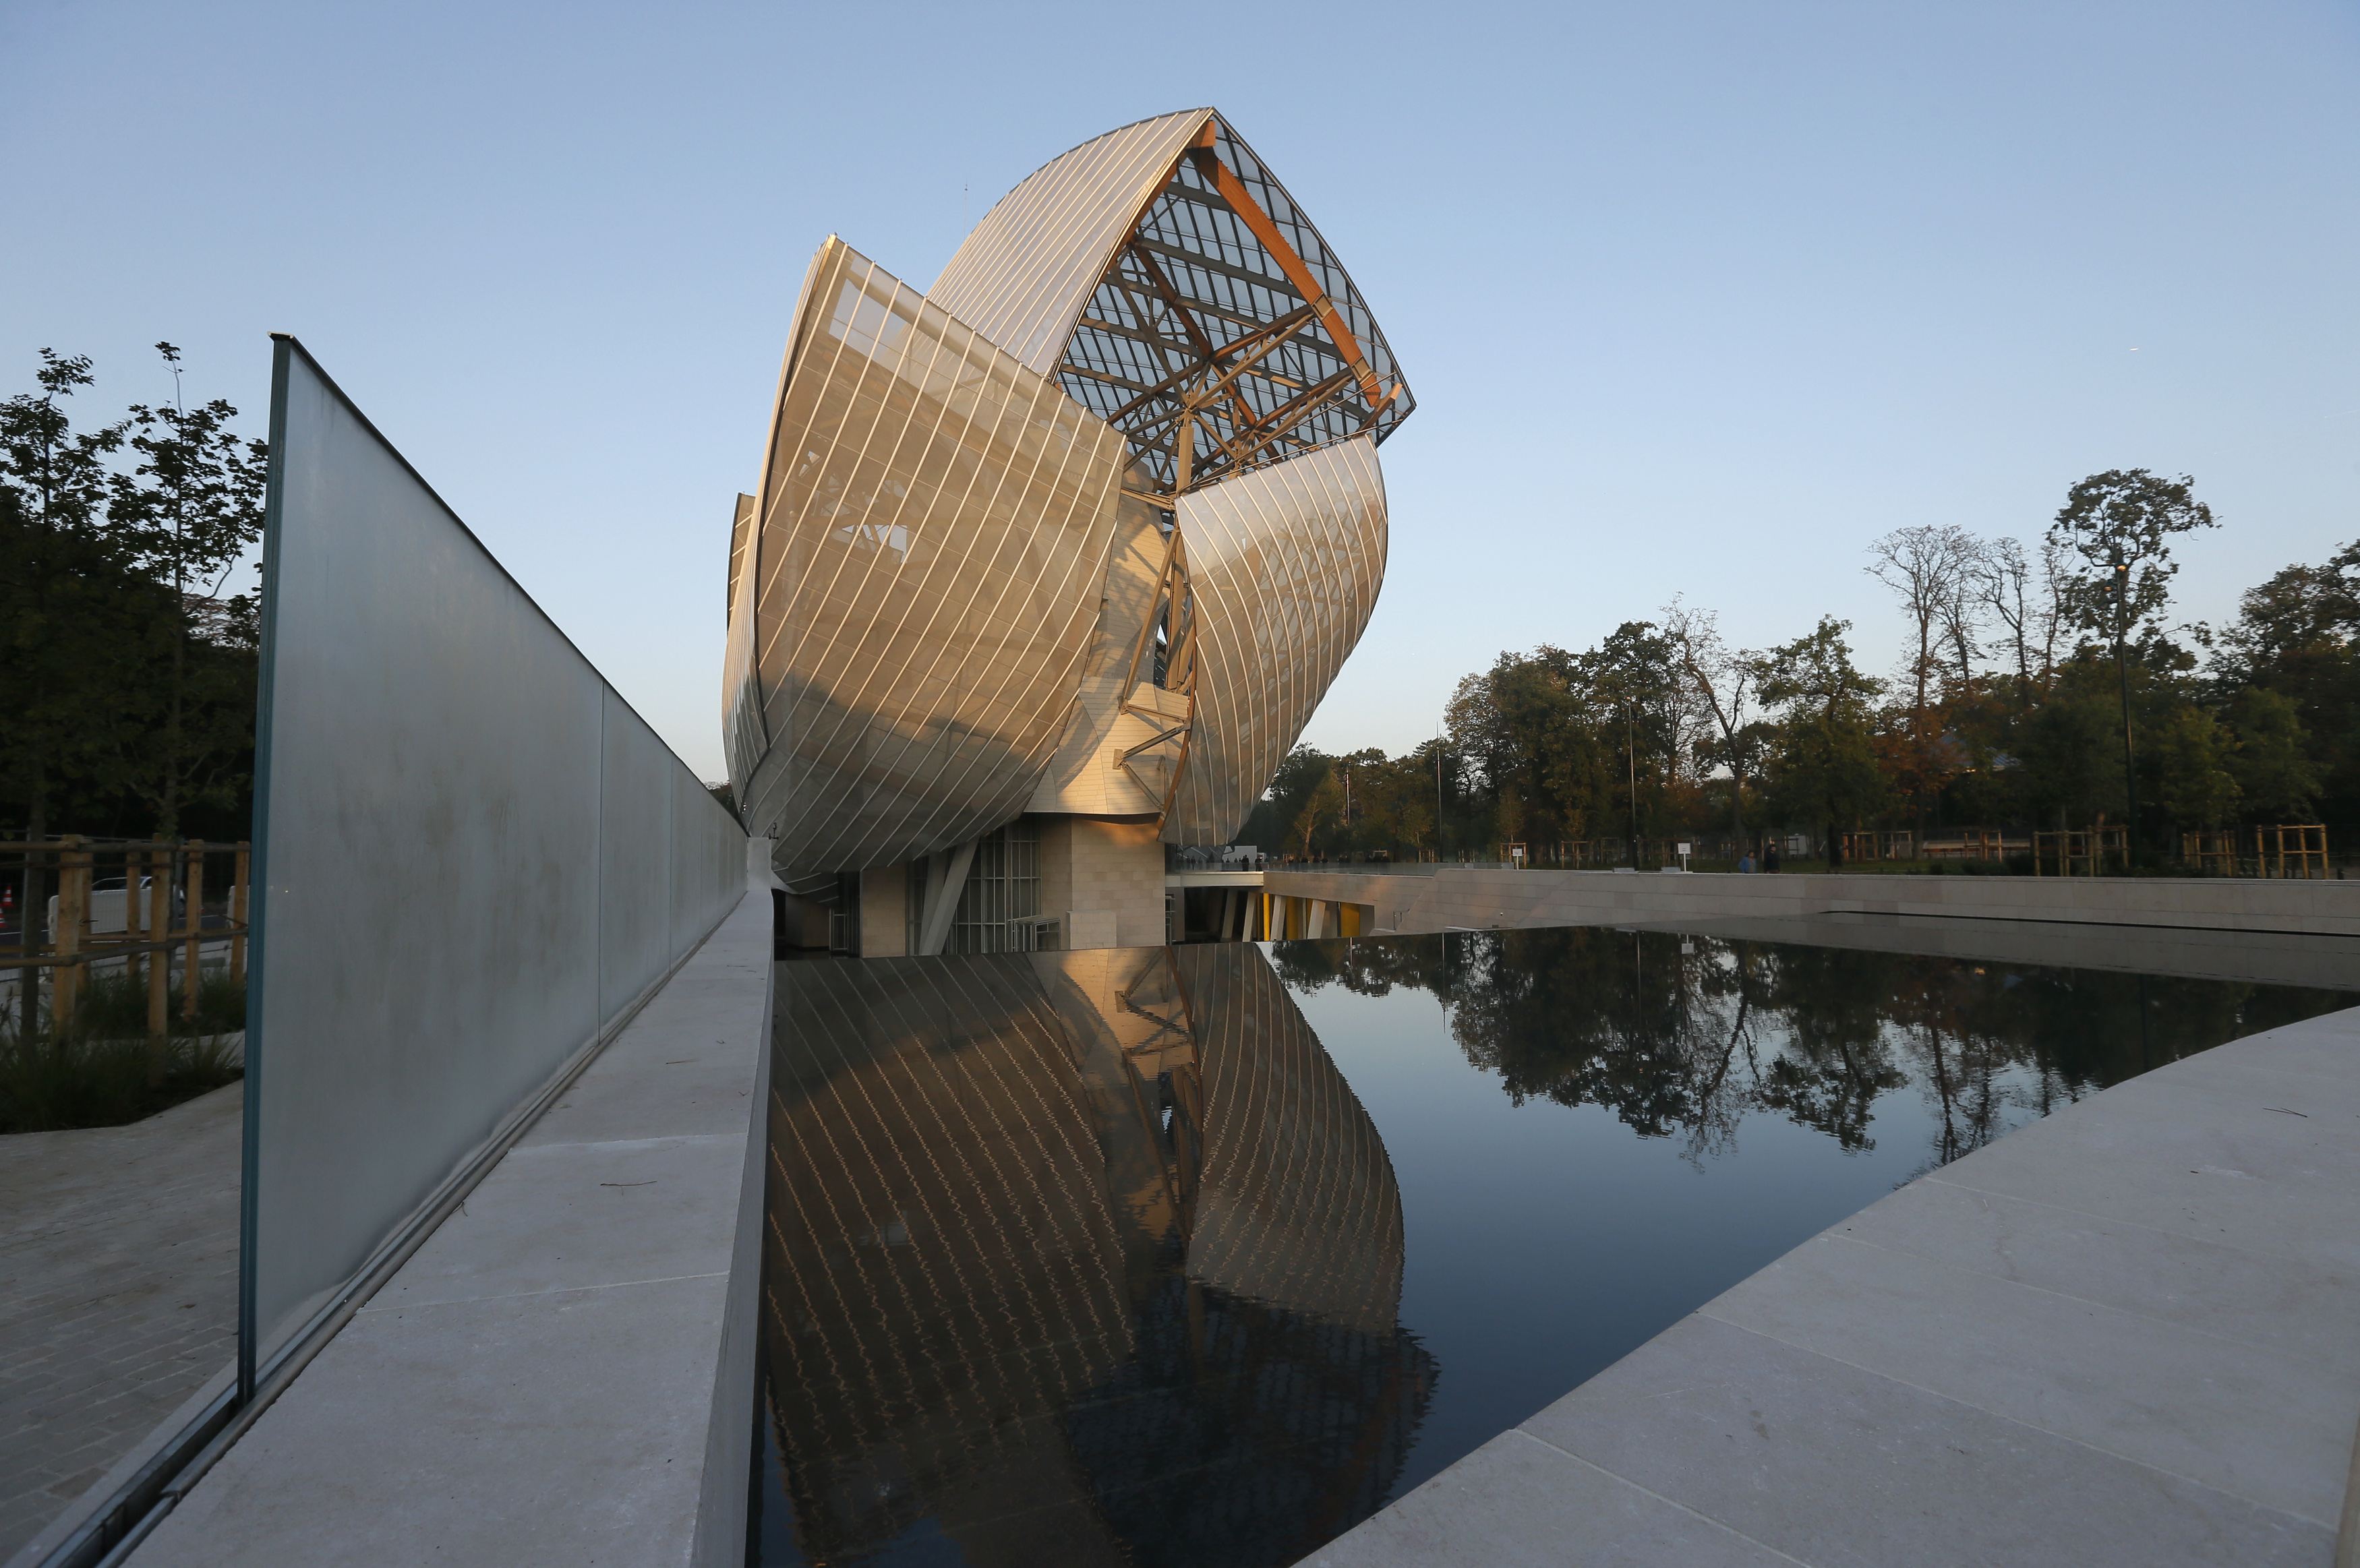 A general view shows the Fondation Louis Vuitton designed by architect Frank Gehry in the Bois de Boulogne